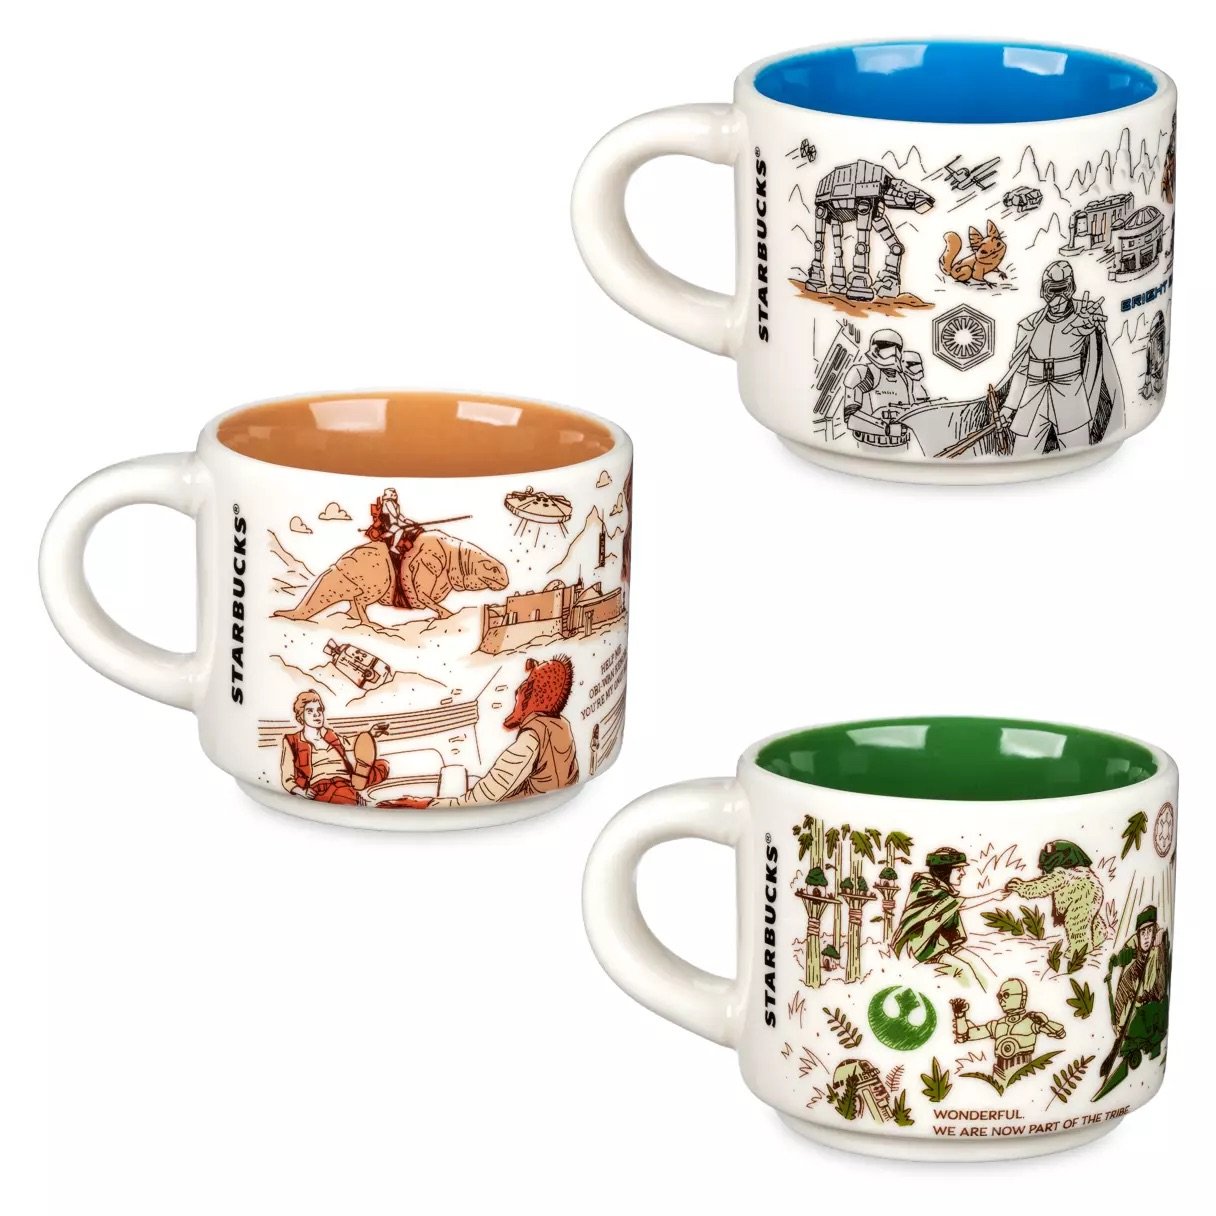 New Been There Starbucks 'Star Wars' Mugs and Ornaments Inspired by Jakku,  Coruscant, and Mustafar at Walt Disney World - WDW News Today